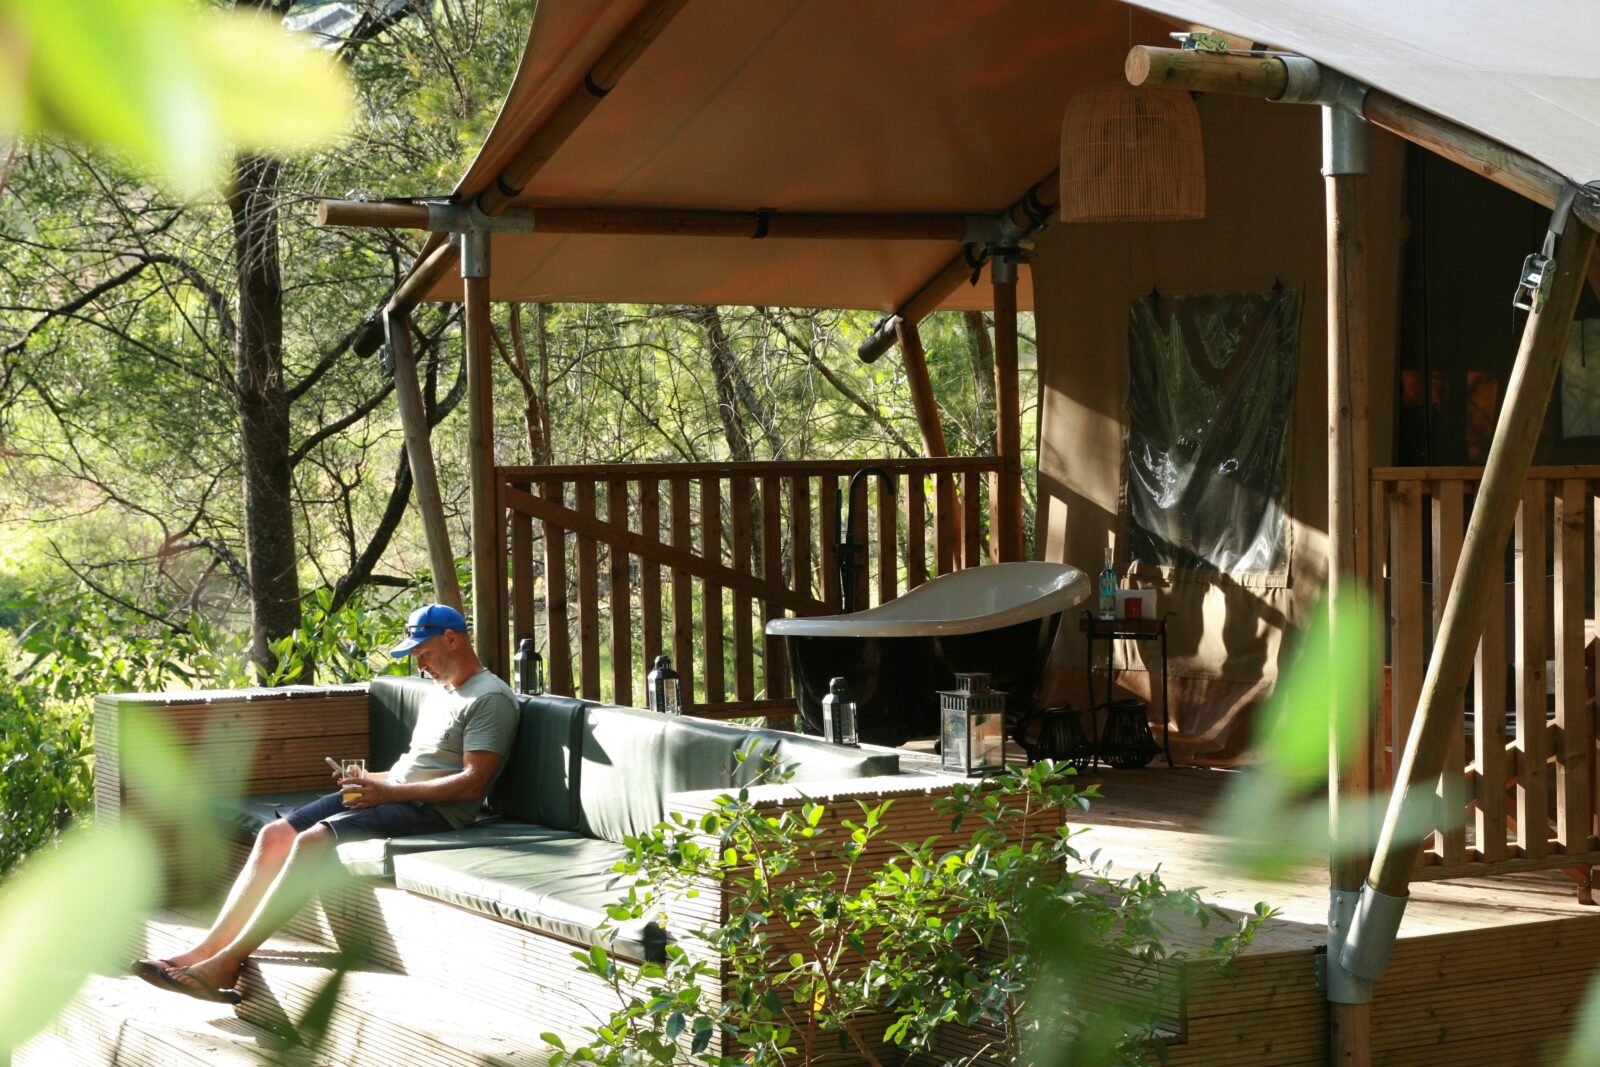 Relaxing on the deck of one of the tented lodges at Ding Dang Doo Ranch